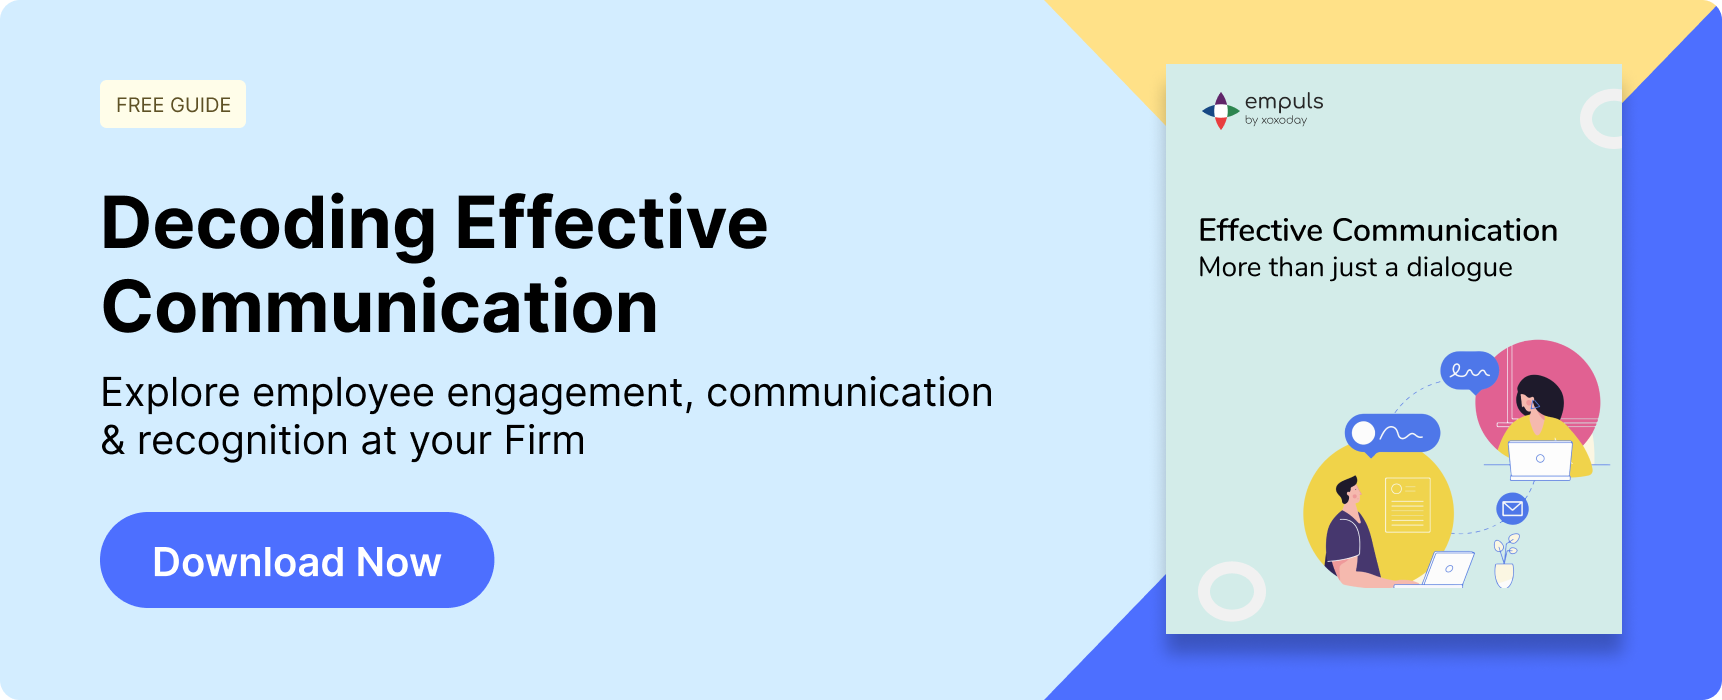 Free Guide on Effective Communication